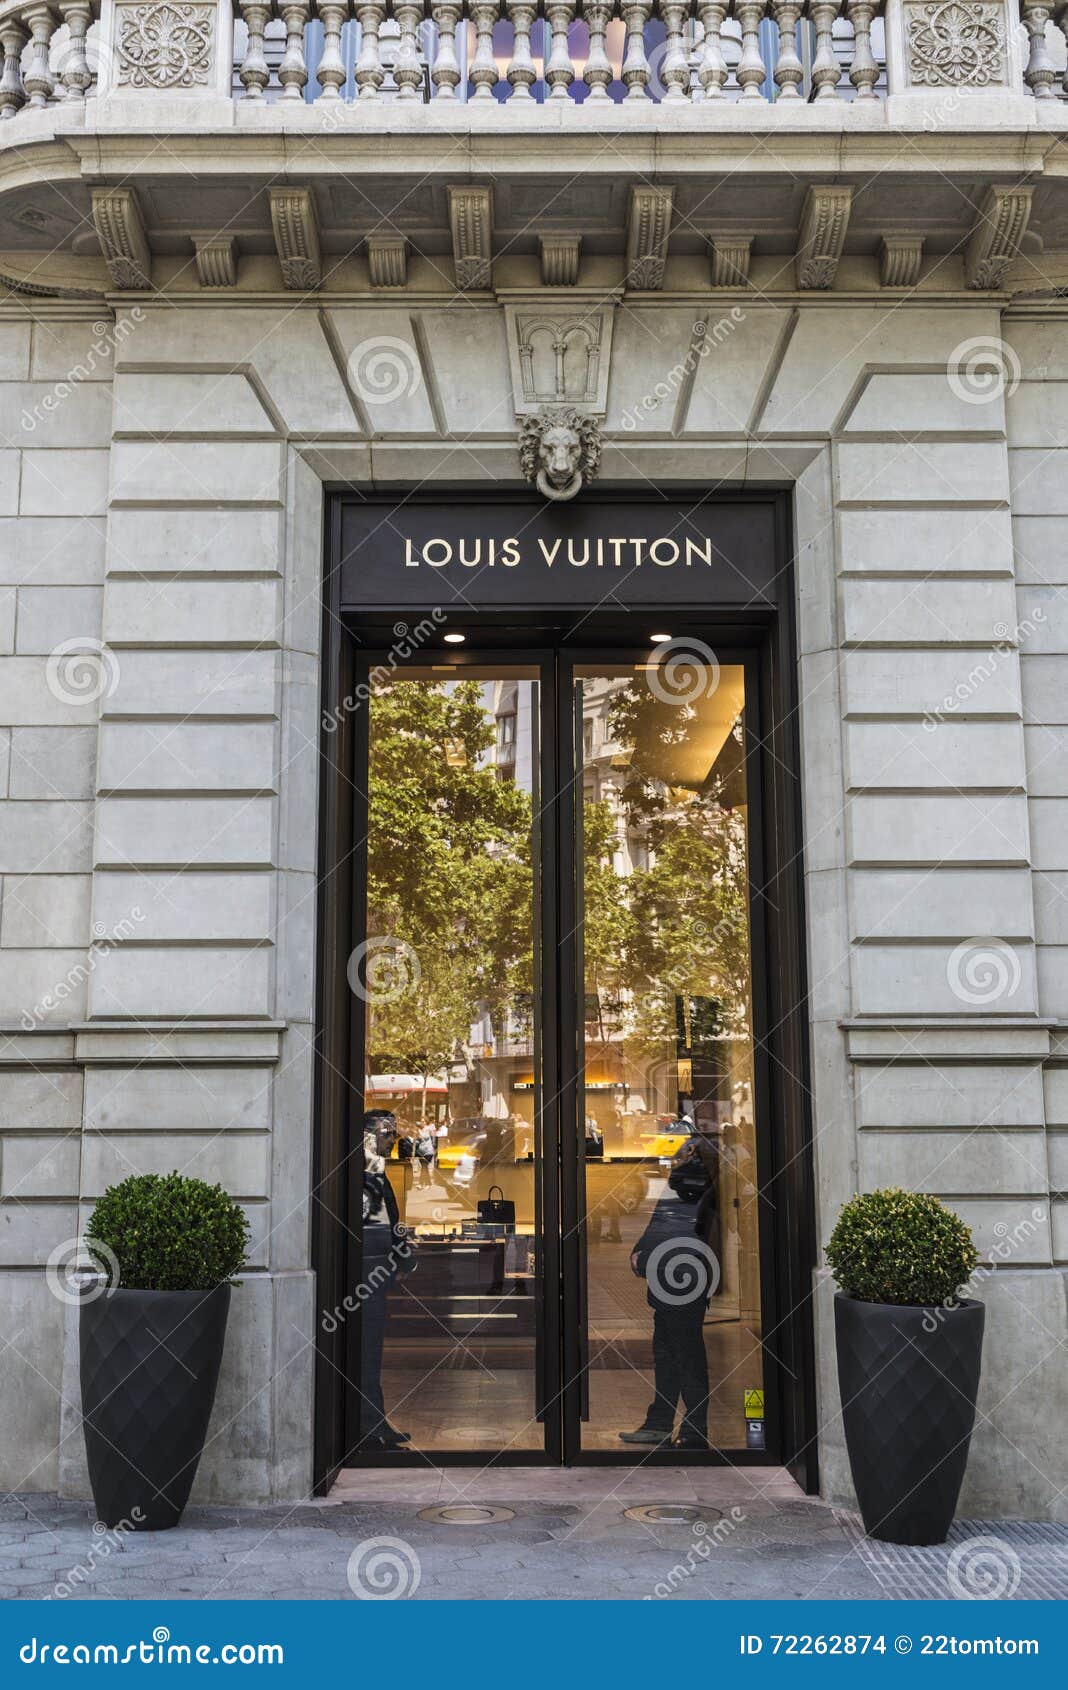 Louis Vuitton Shop, Barcelona Editorial Stock Image - Image of showcase, jewelry: 72262874